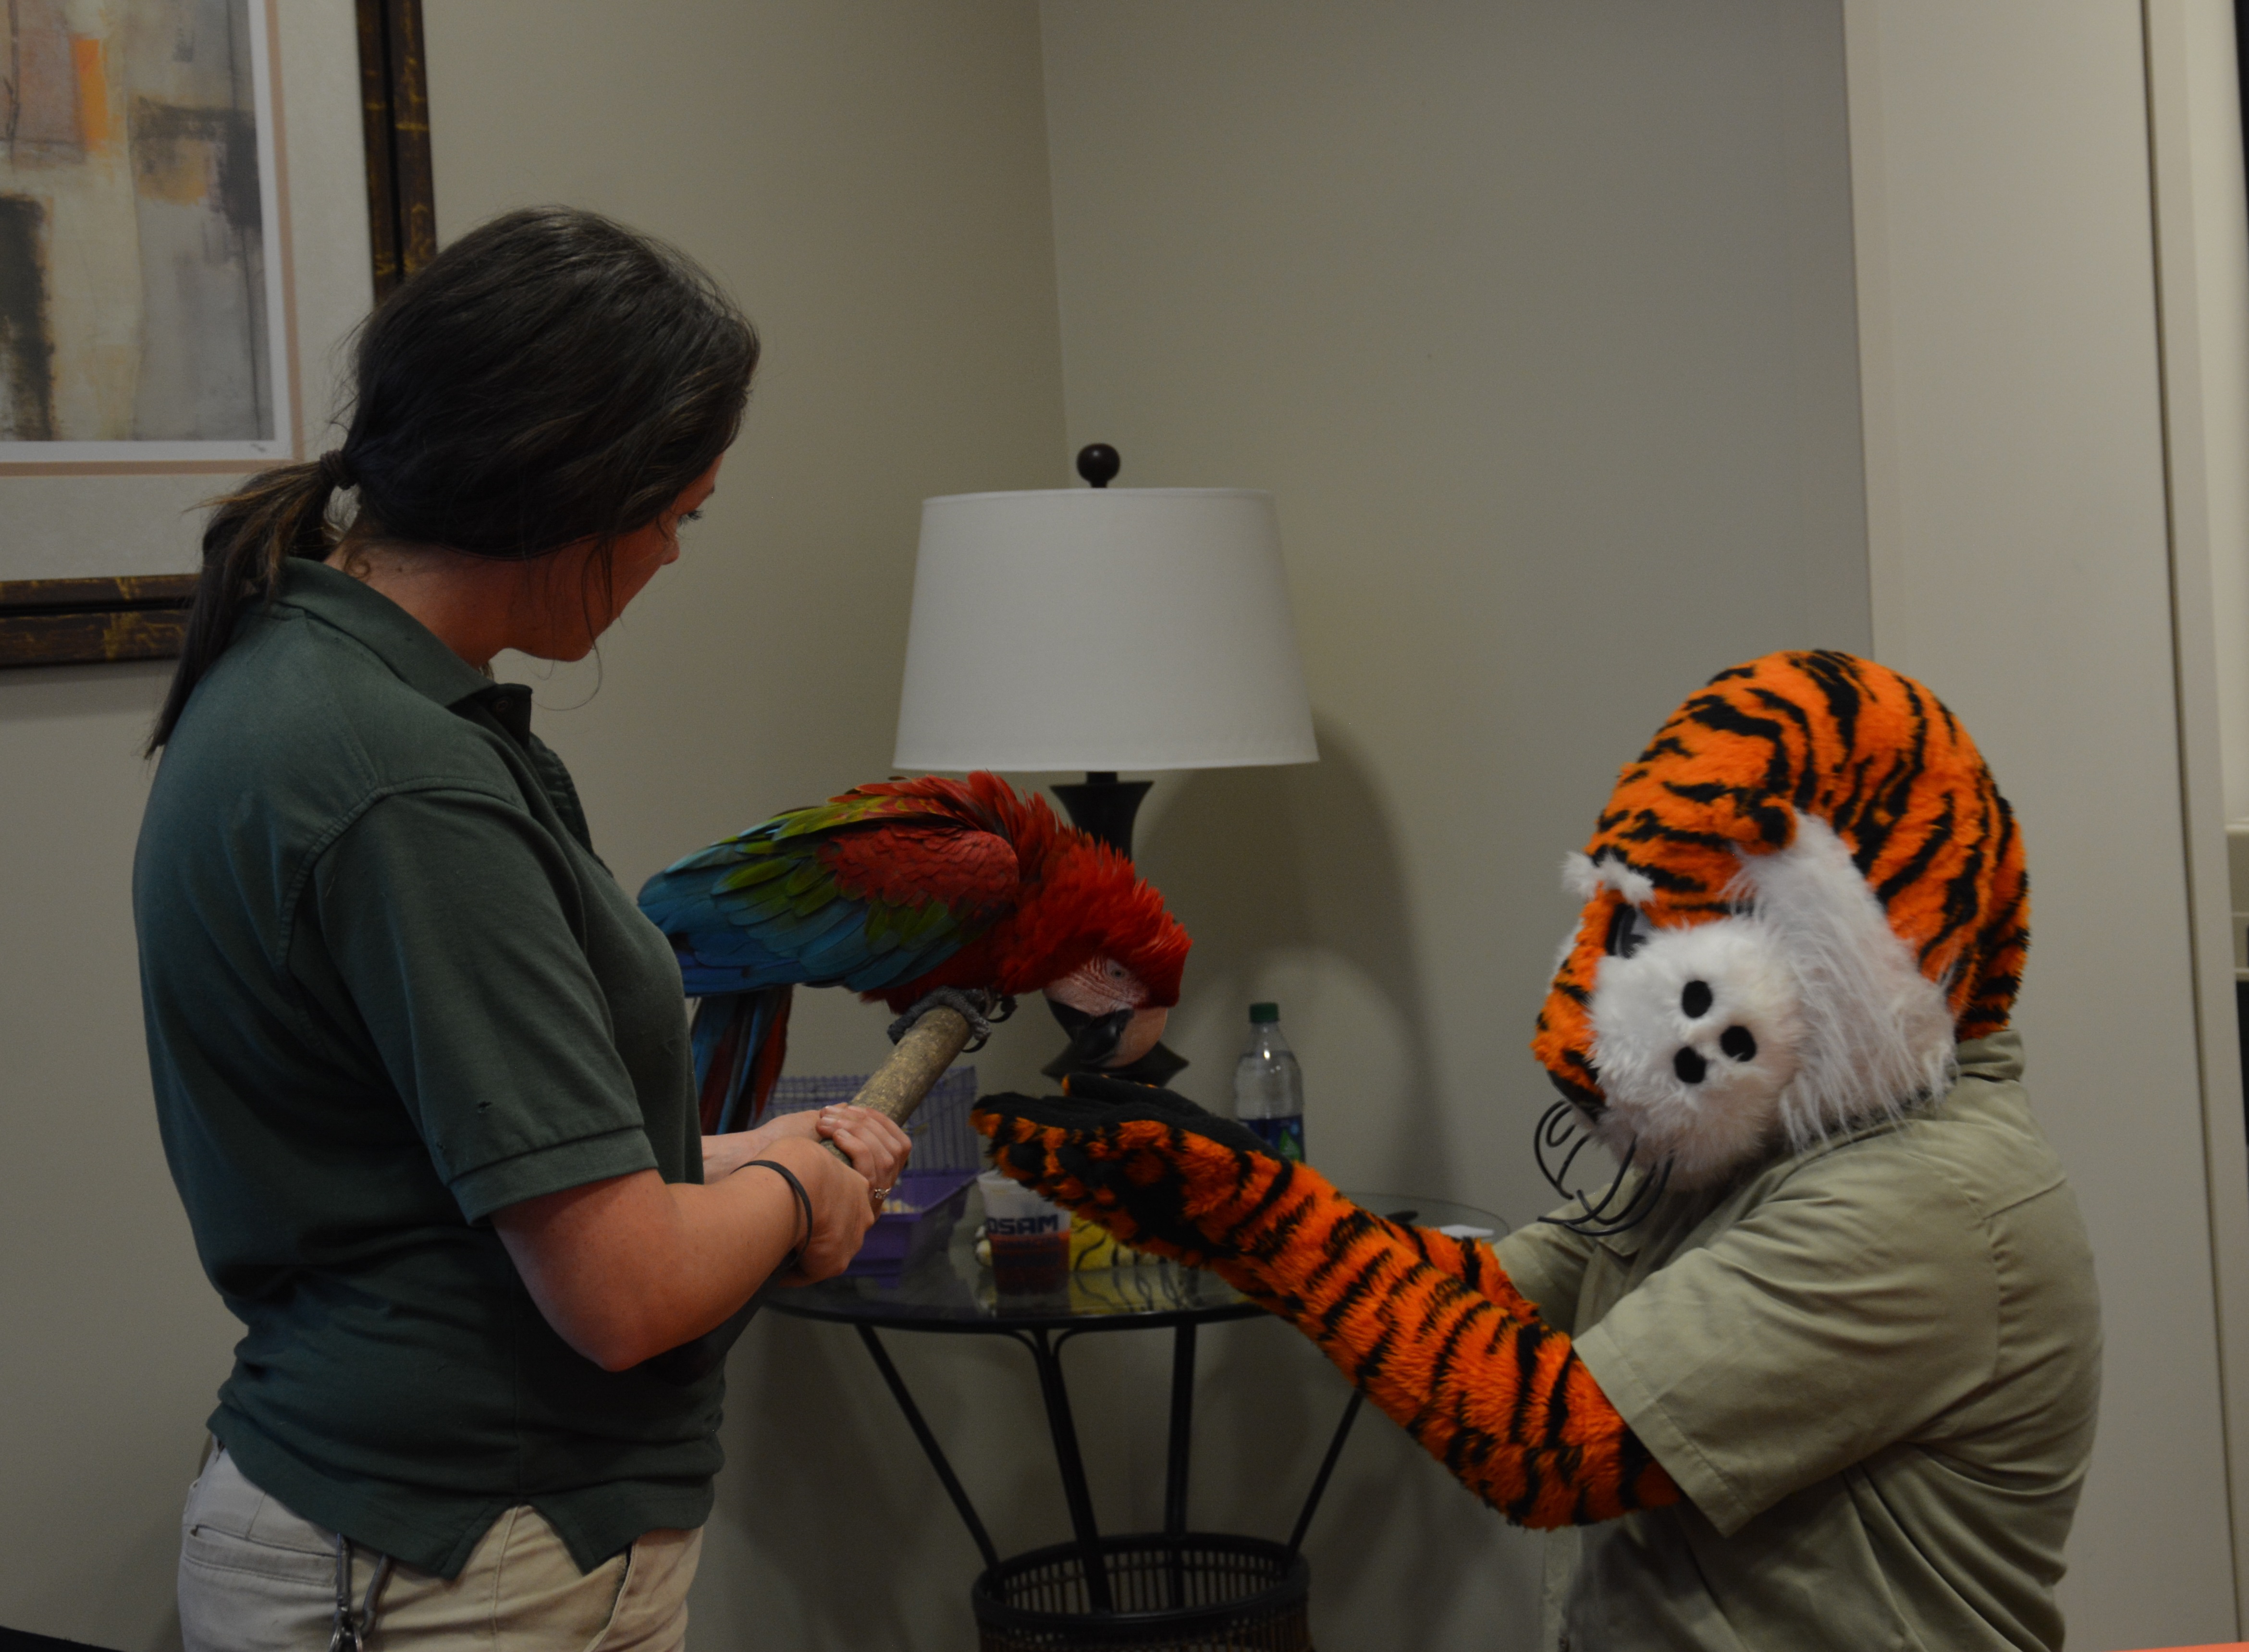 Aubie feeds a parrot at the 2018 COSAM Open House.